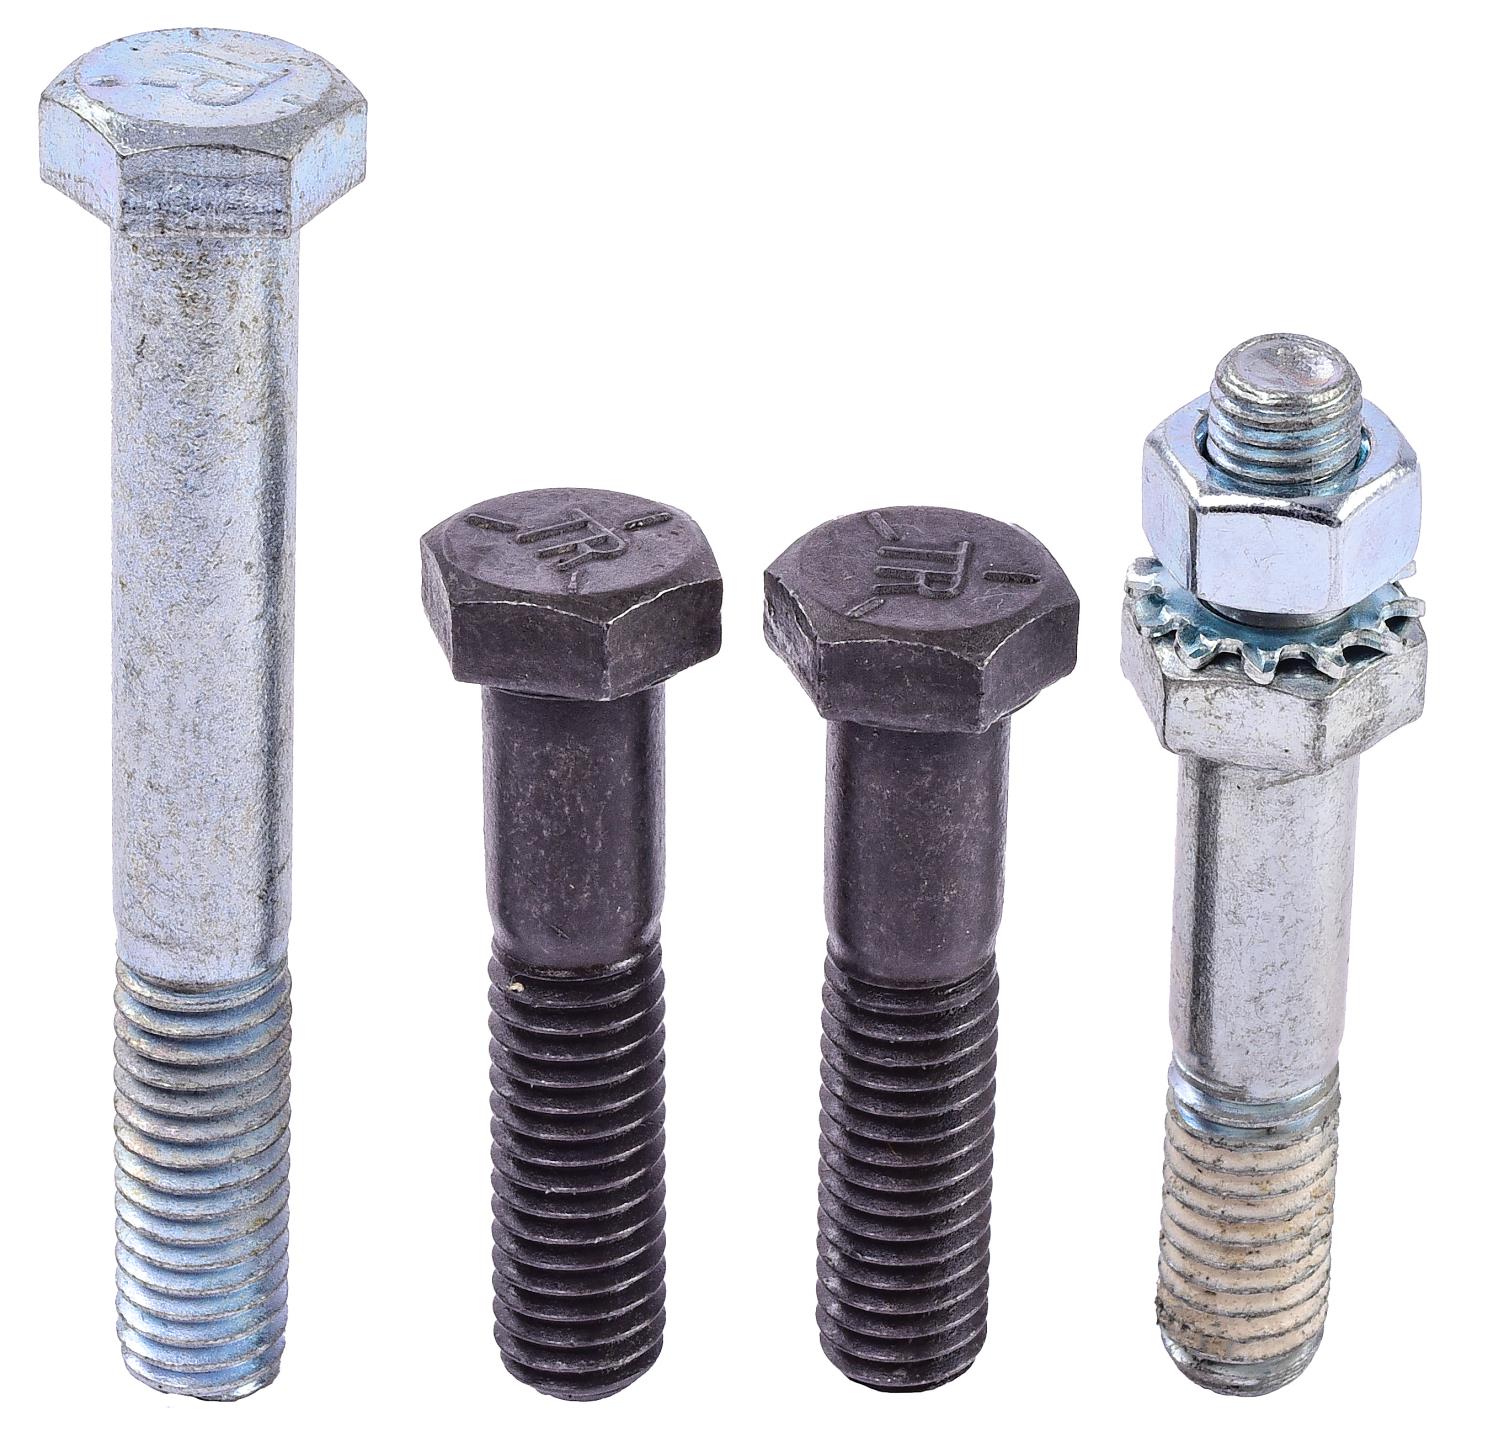 Water Pump Bolt Kit for 1965-1968 Small Block Chevrolet Engines